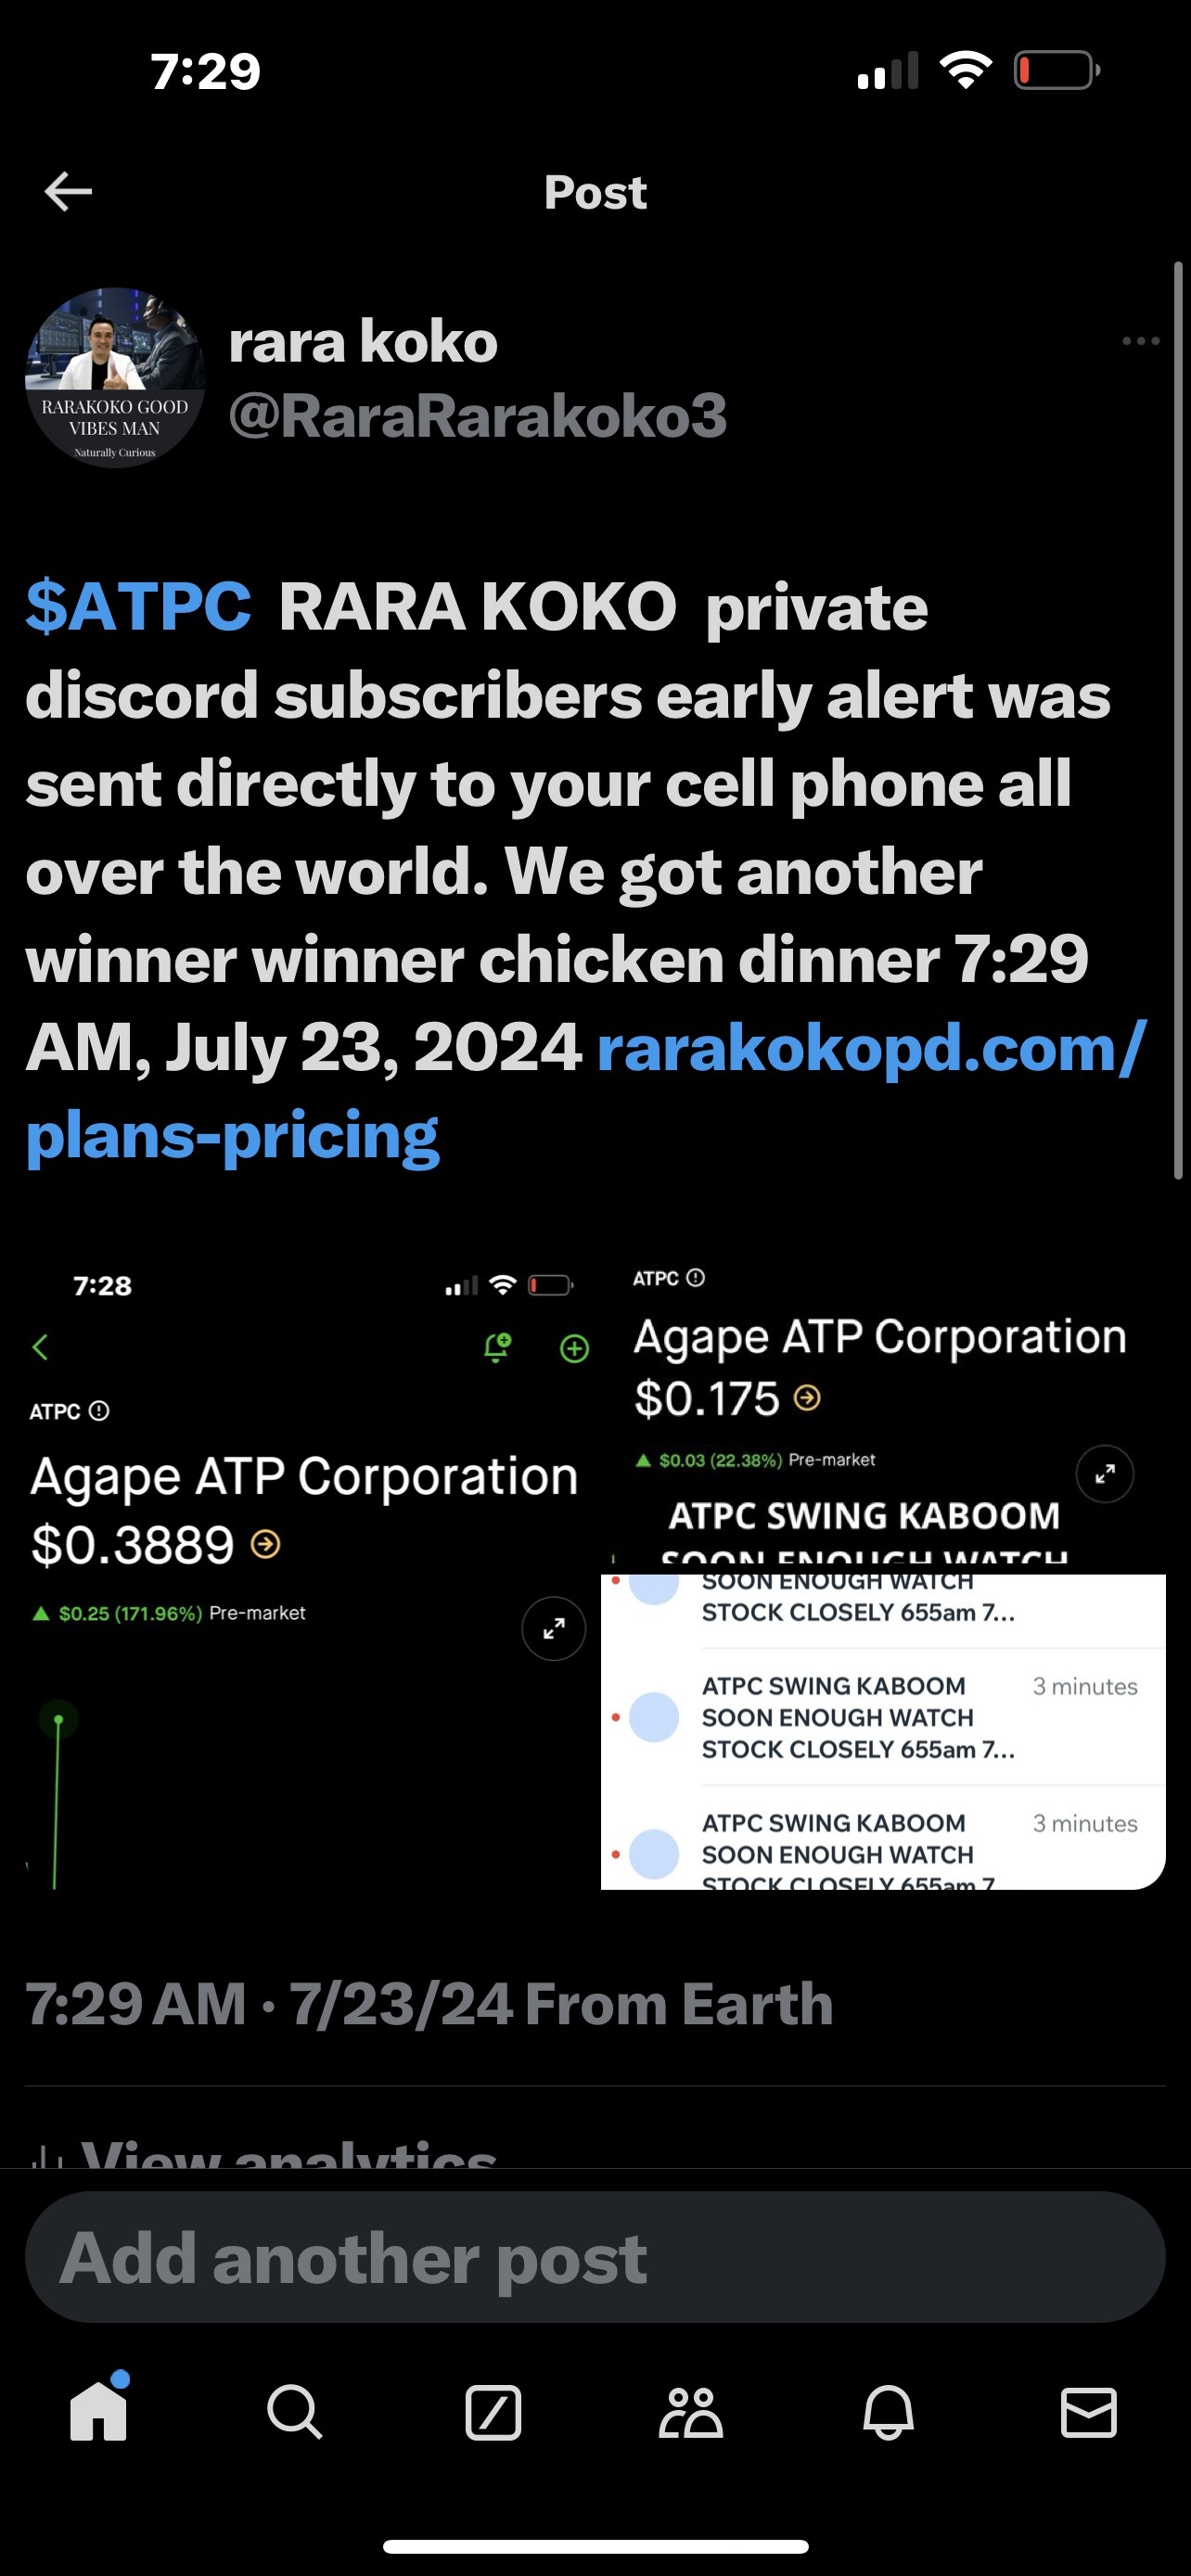 $ATPC  RARA KOKO  private discord subscribers early alert was sent directly to your cell phone all over the world. We got another winner winner chicken dinner 7...